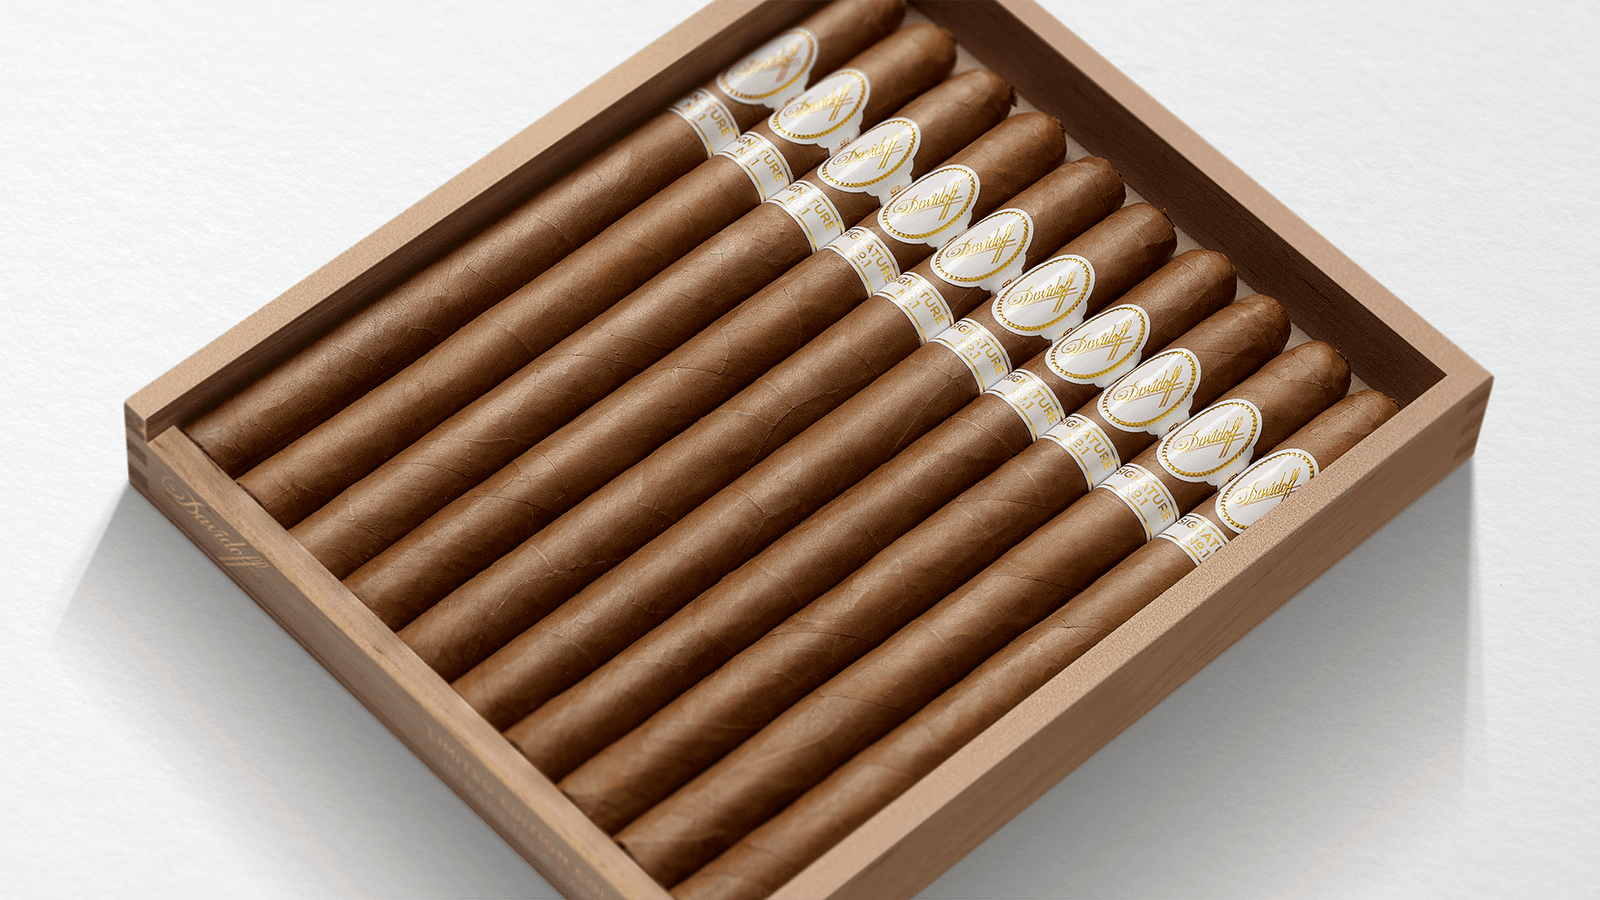 Davidoff The Difference Signature No. 1 Limited Edition